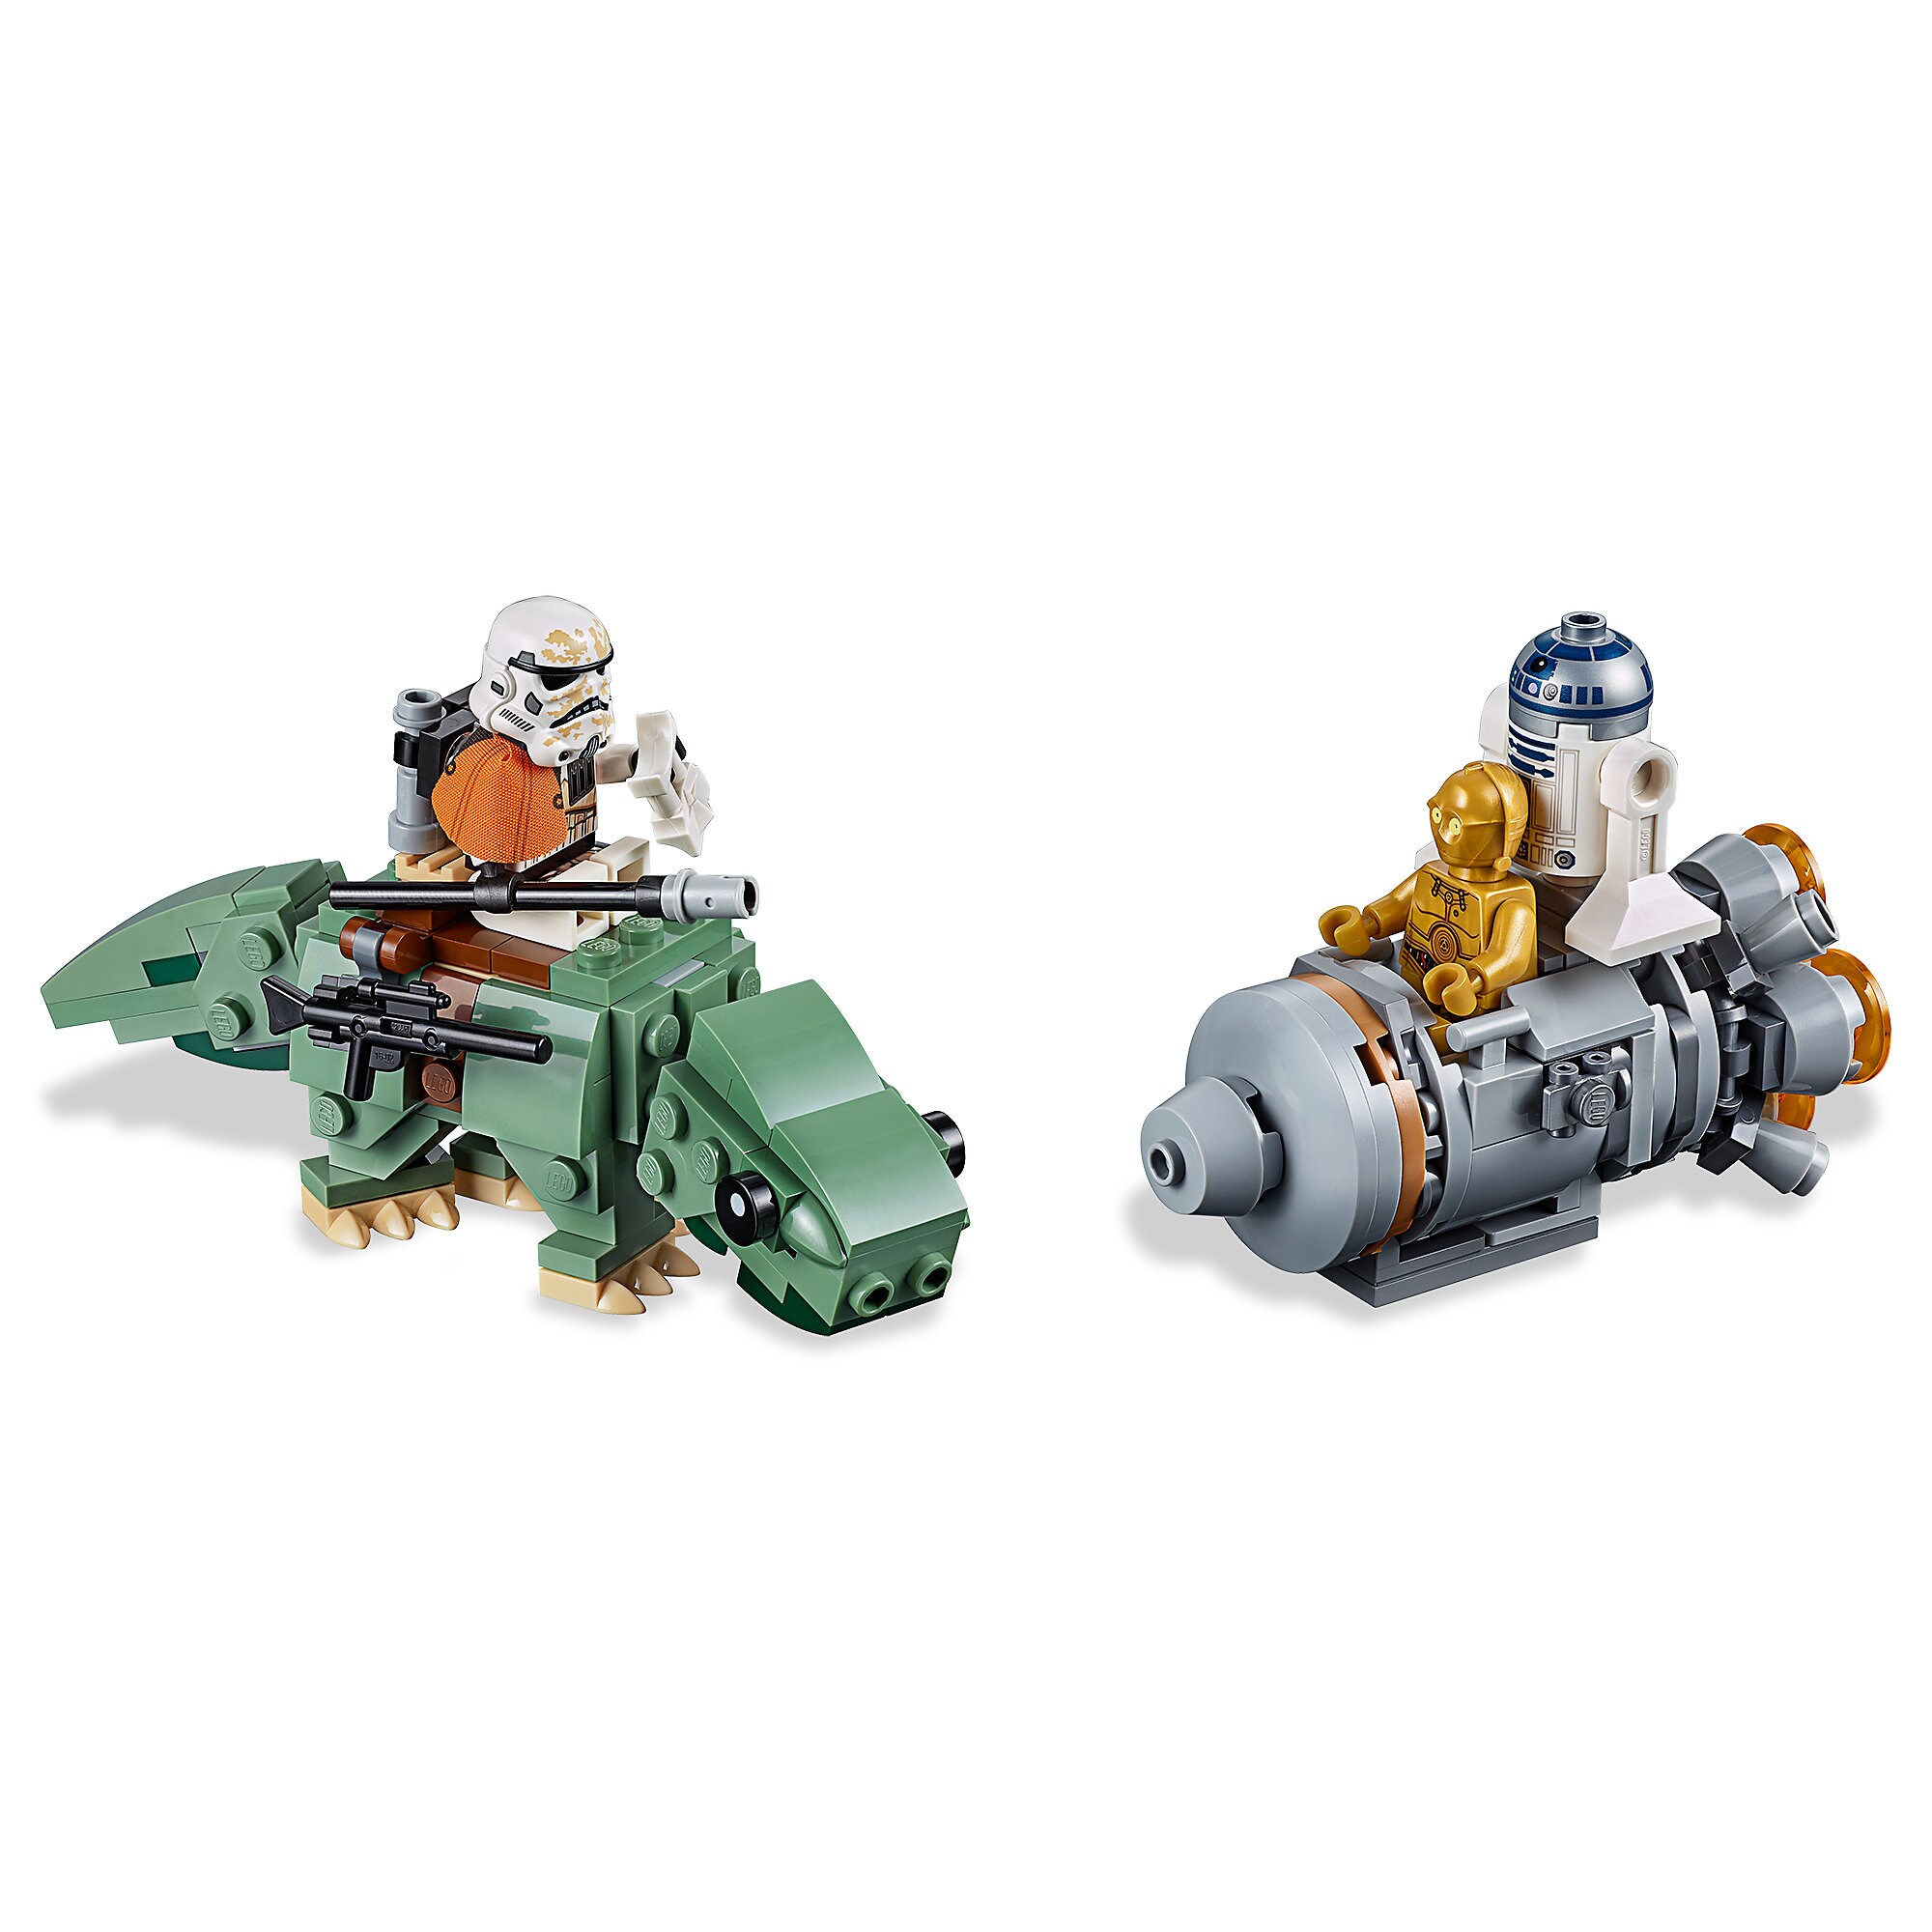 Escape Pod vs. Dewback Microfighters Playset by LEGO - Star Wars: A New Hope